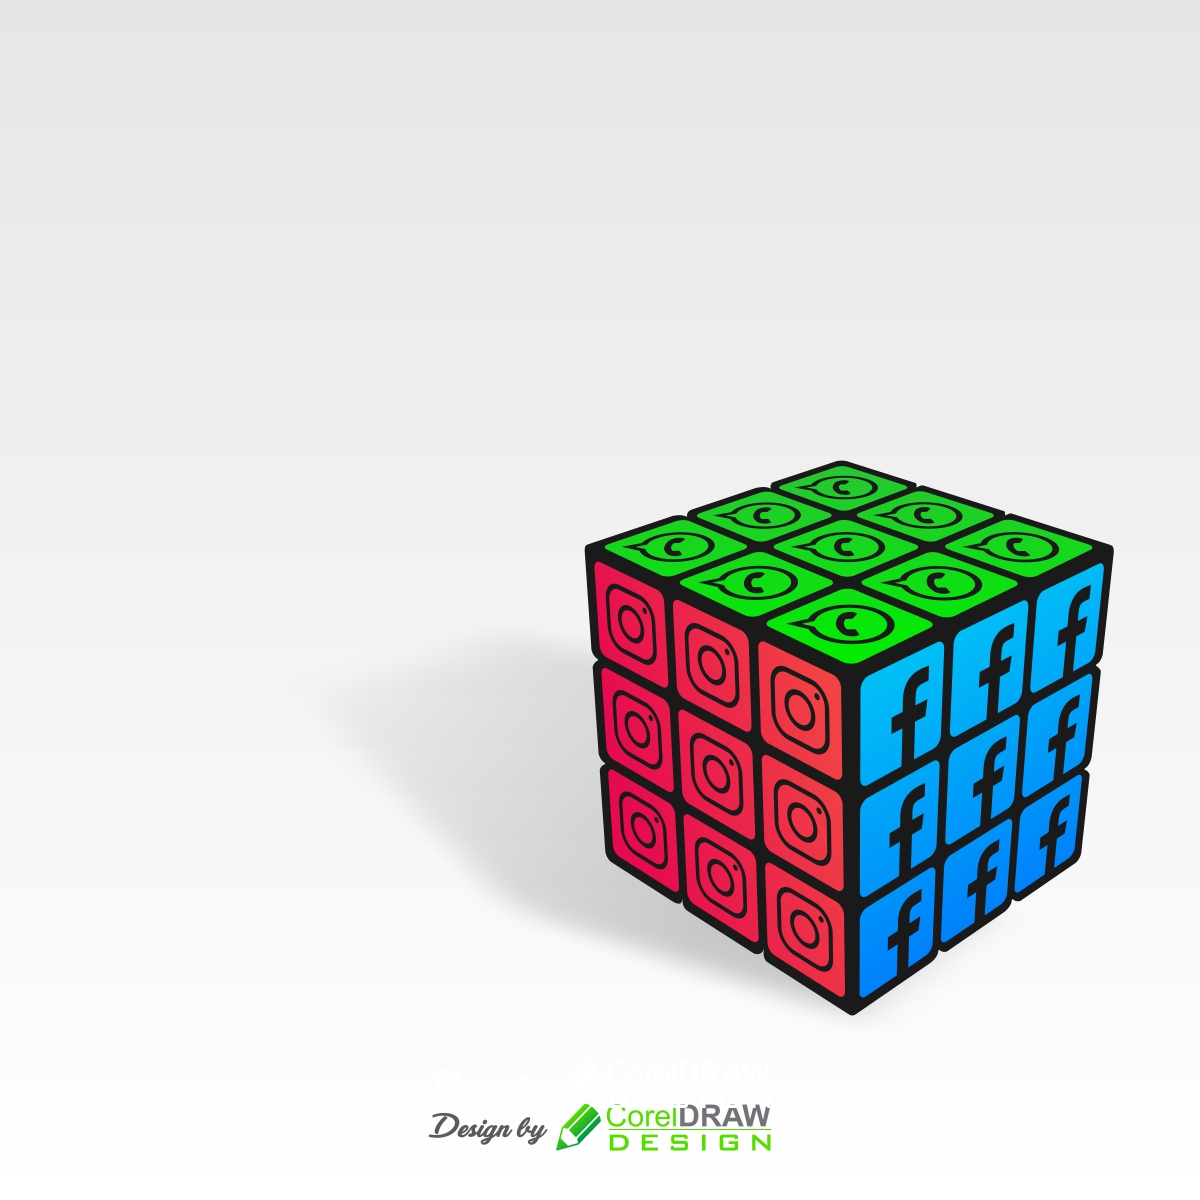 Download Download Rubik Cube With Social Media Icons Background Free Cdr Coreldraw Design Download Free Cdr Vector Stock Images Tutorials Tips Tricks